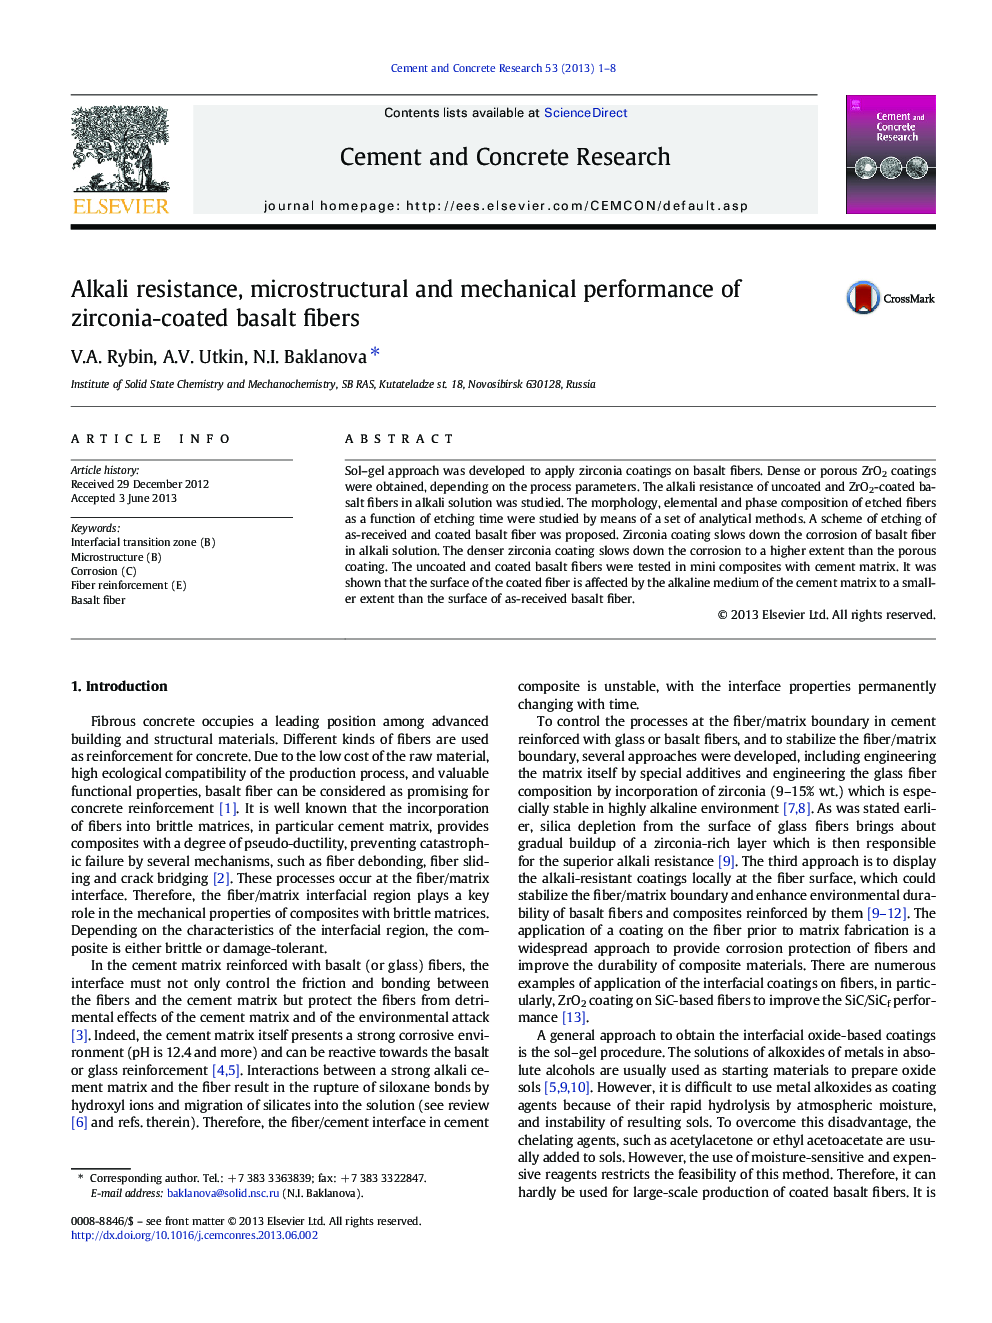 Alkali resistance, microstructural and mechanical performance of zirconia-coated basalt fibers